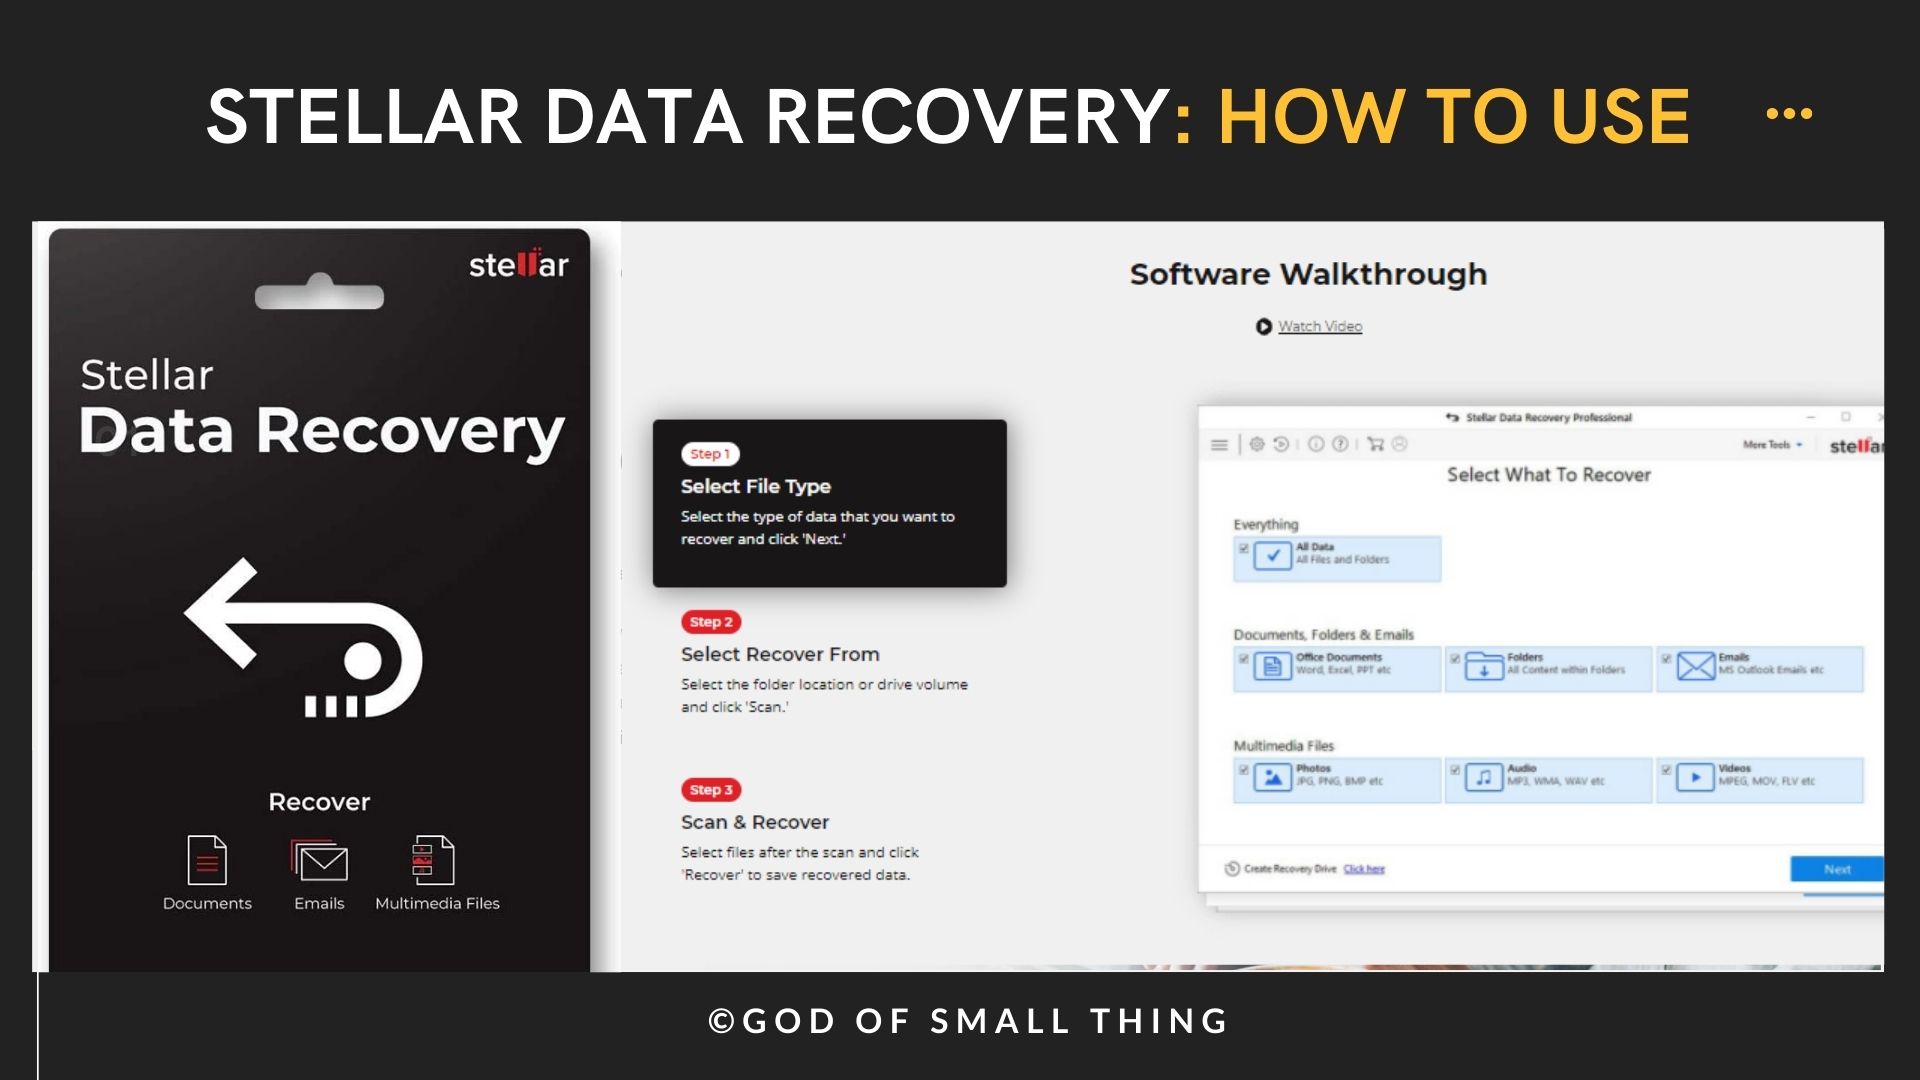 How to use stellar data recovery software